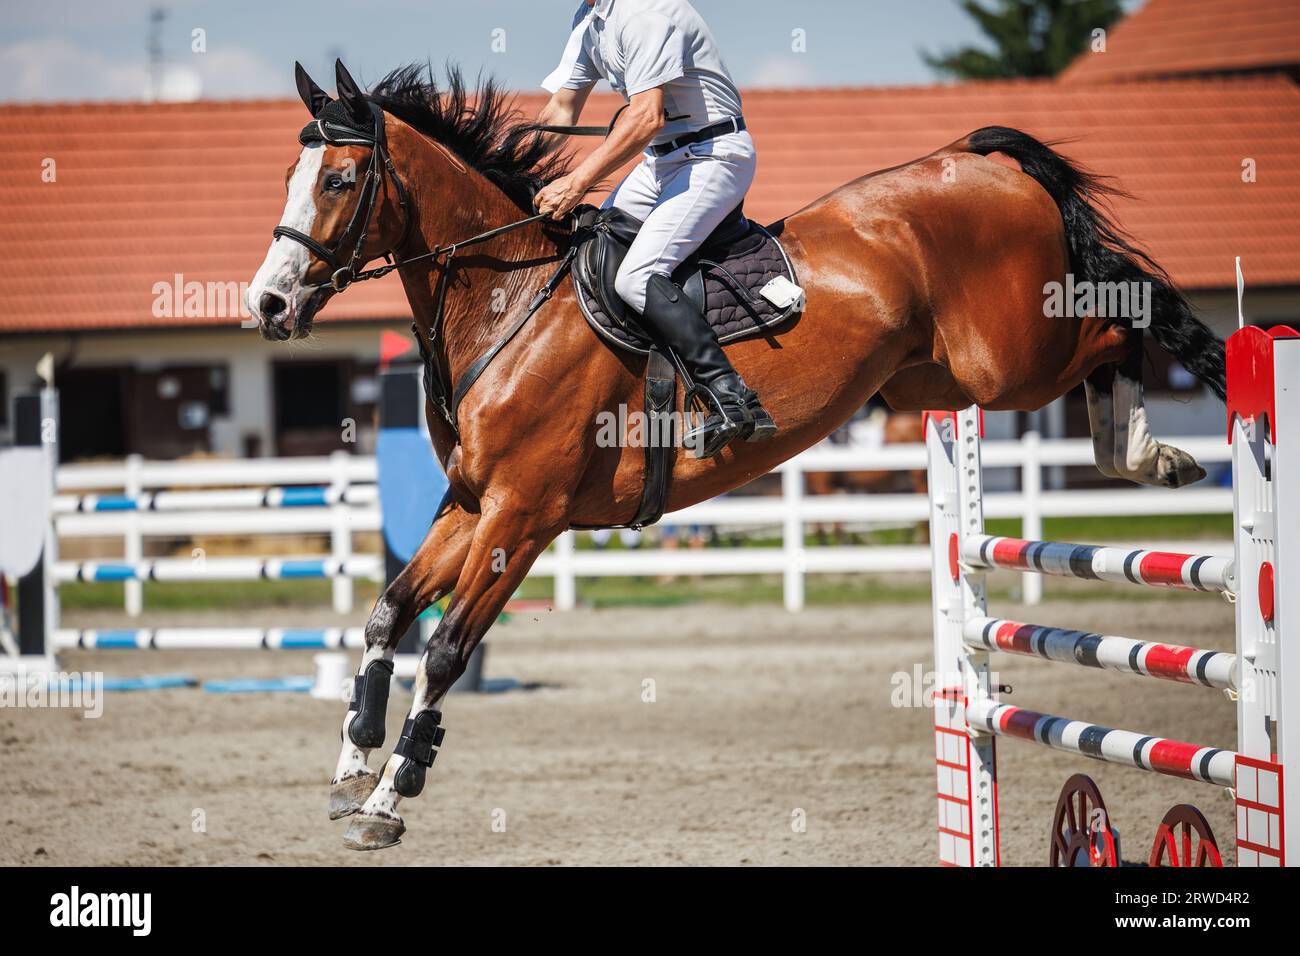 Horse jump over hurdles. Equestrian show jumping with unrecognizable male jockey. Sport event Stock Photo